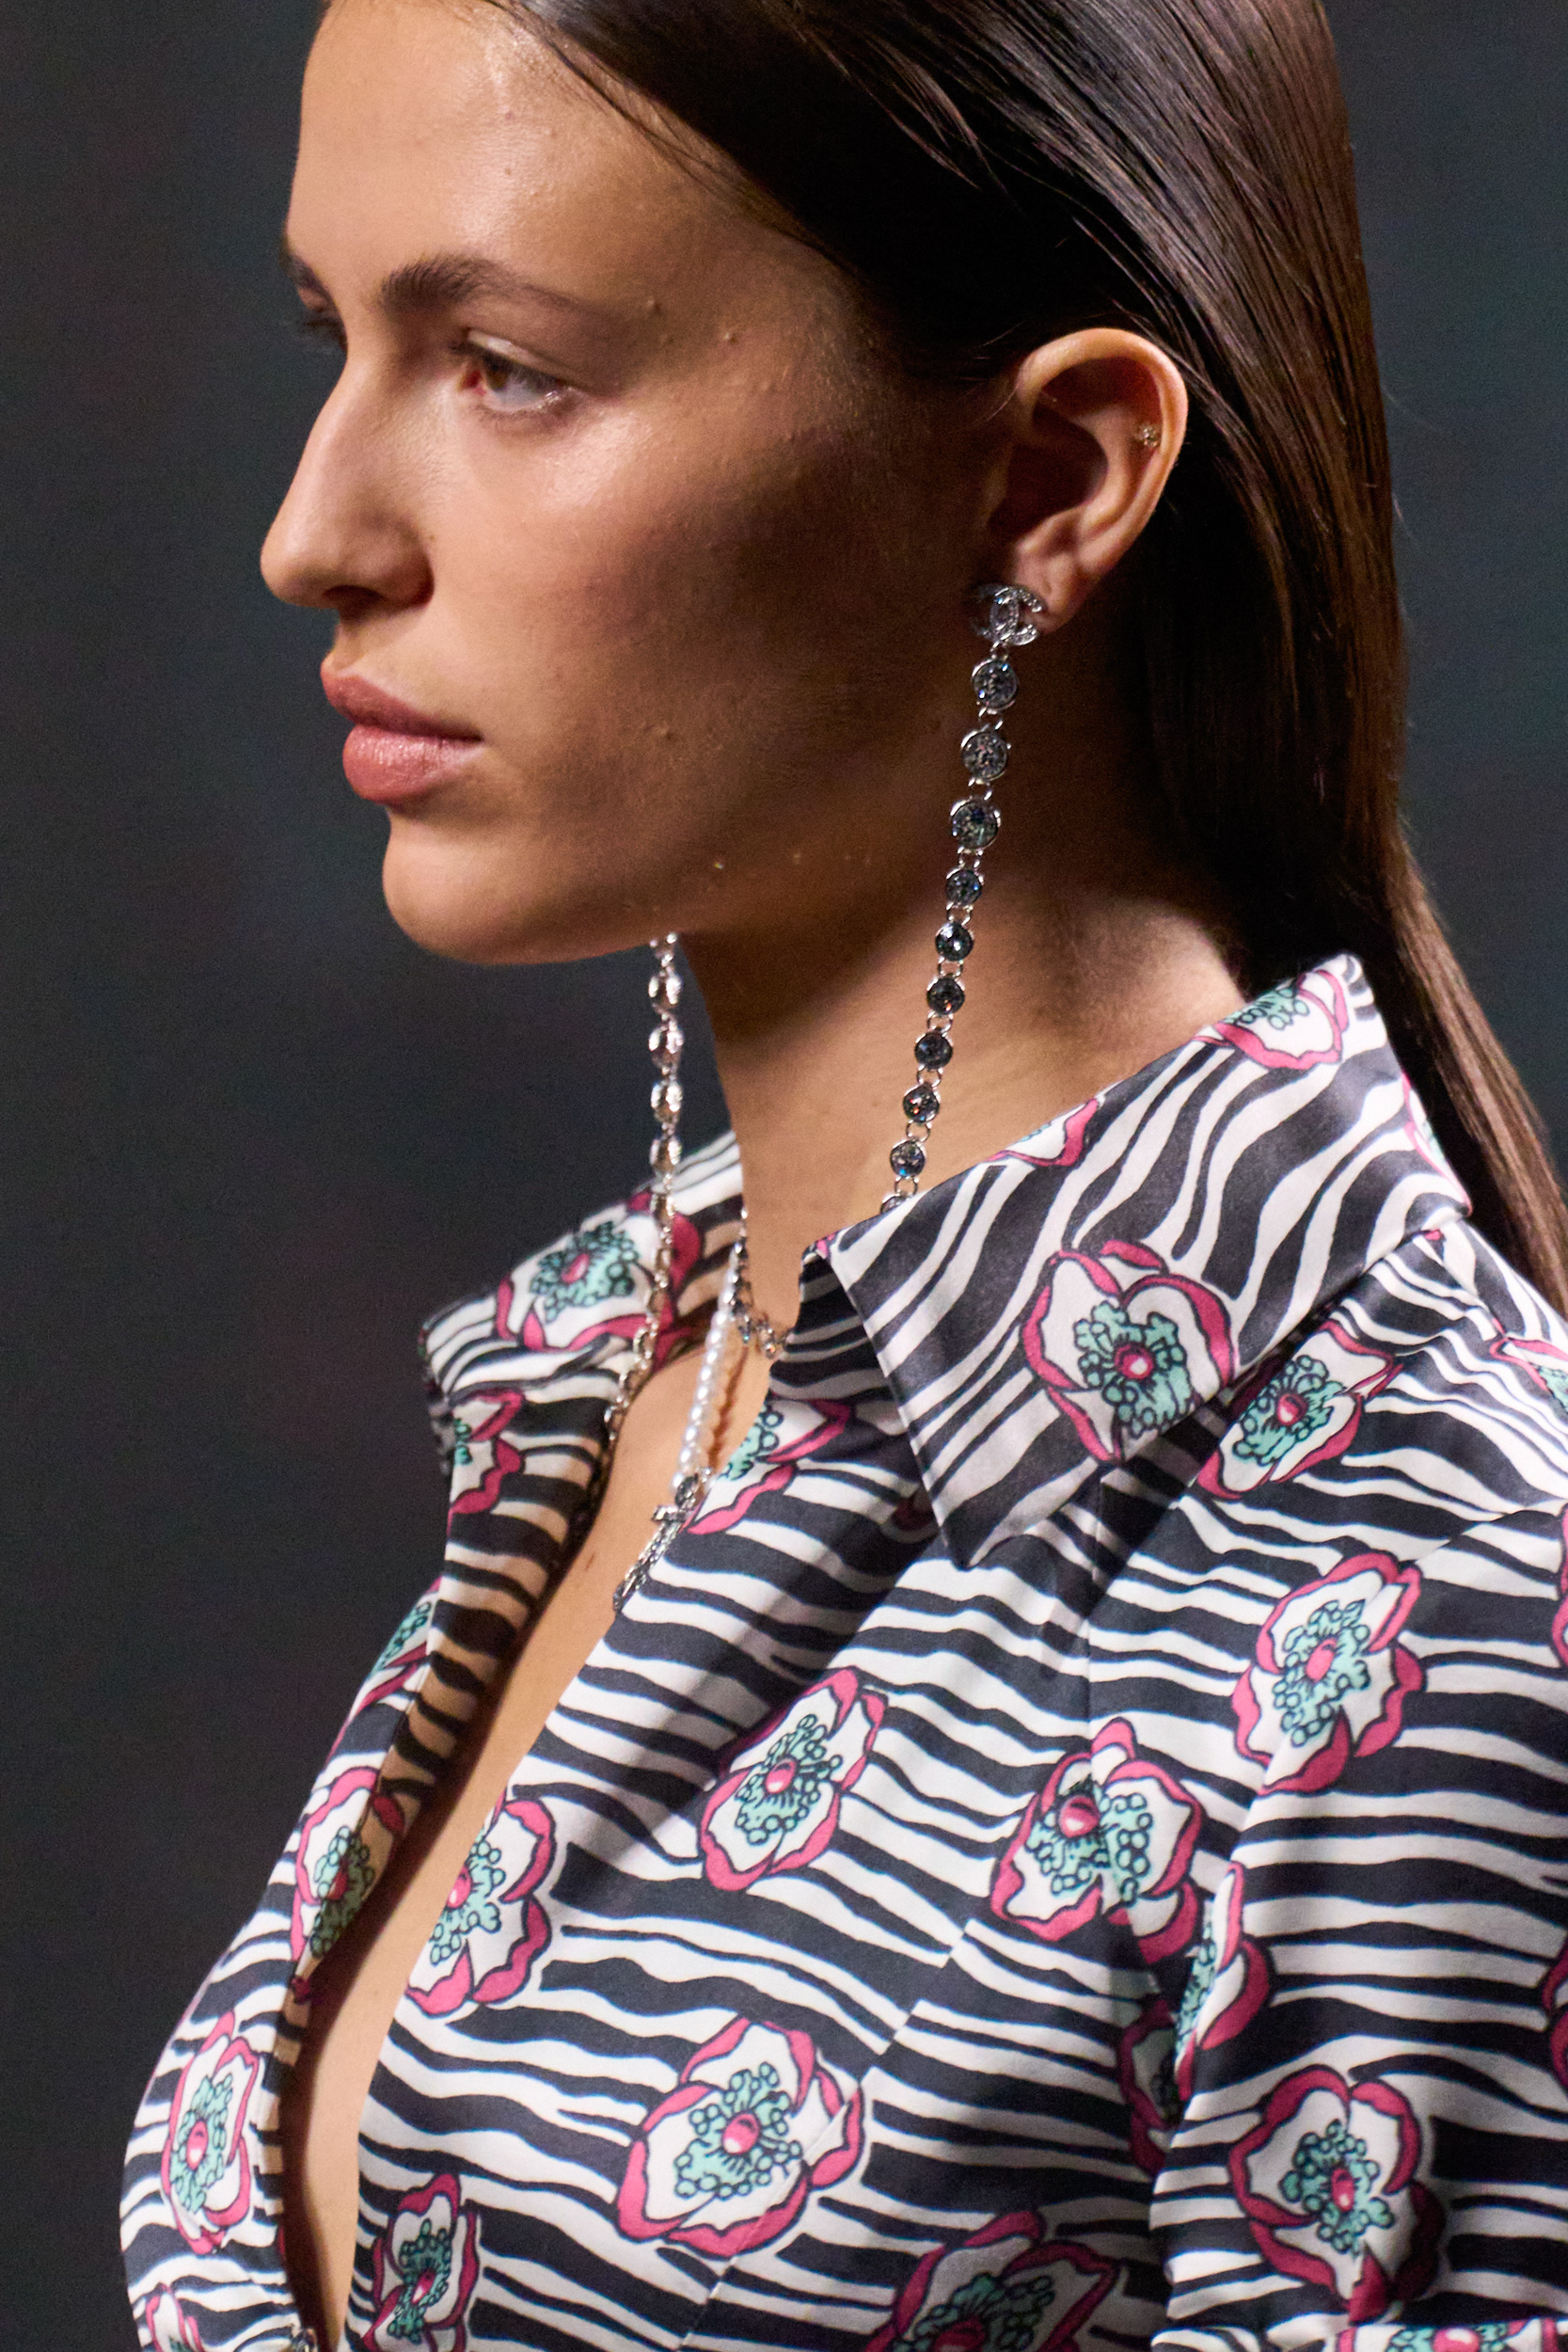 Chanel Spring 2023 Fashion Show Details